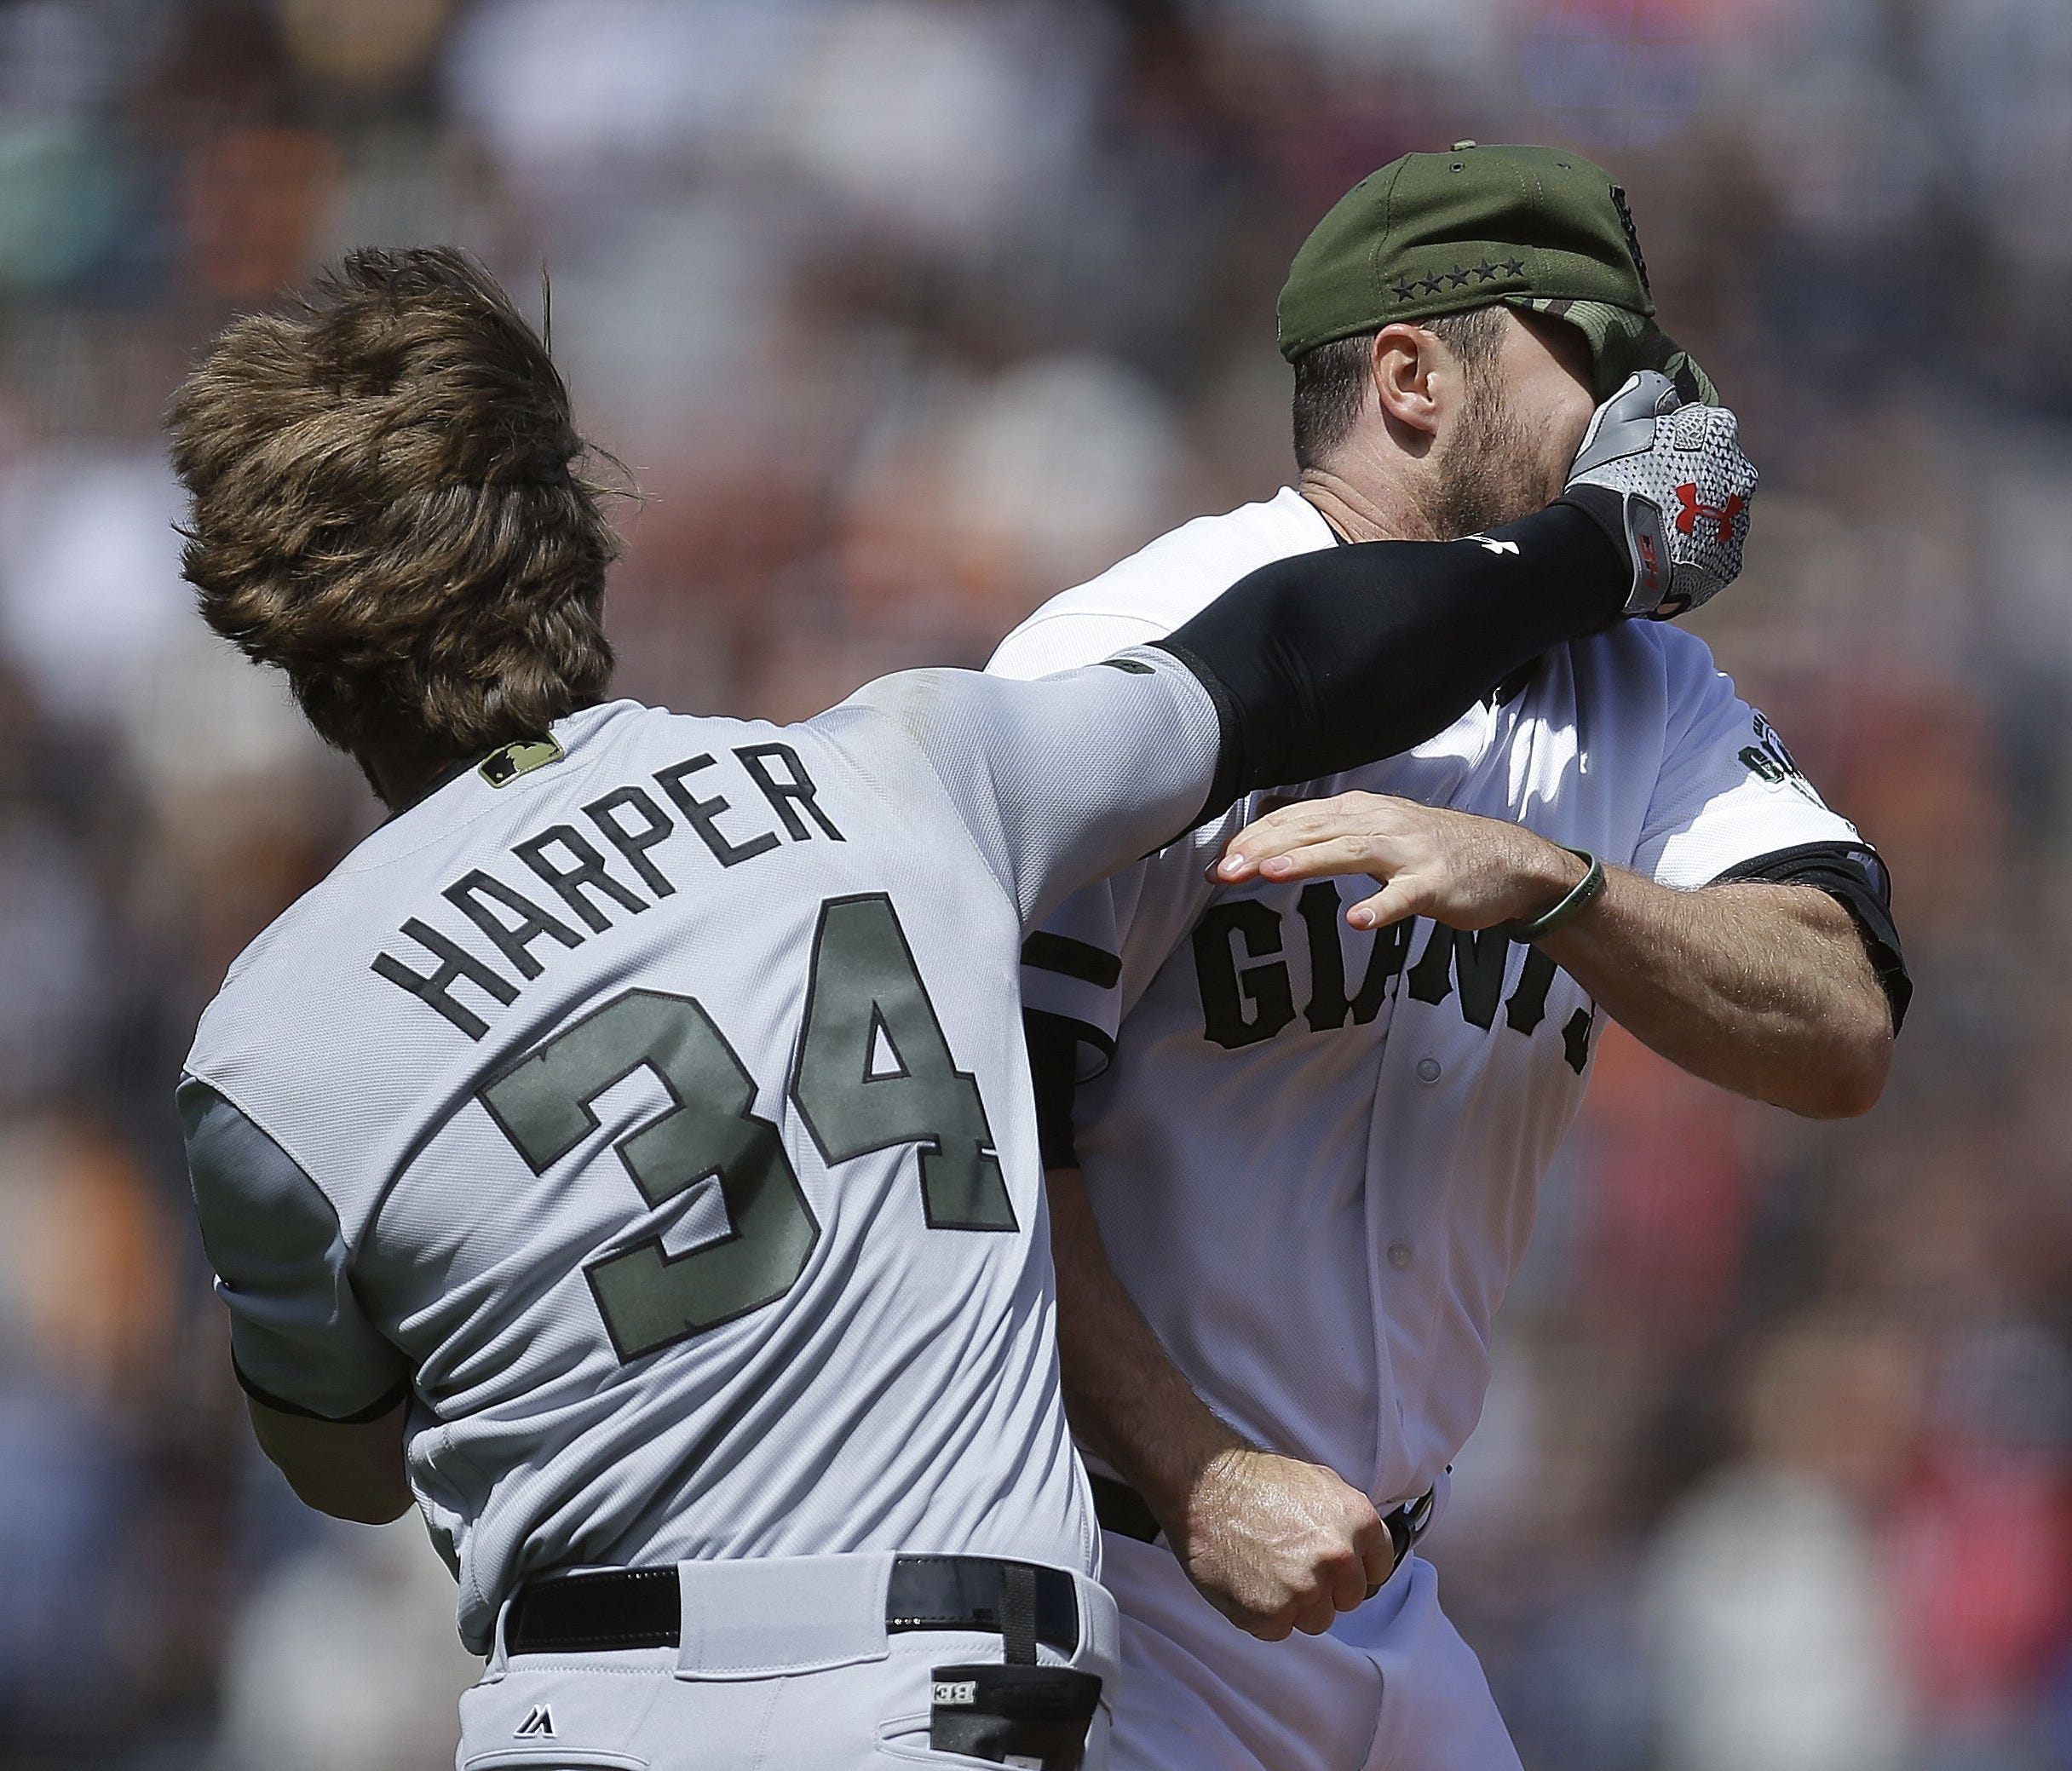 Bryce Harper exchanges blows with Giants reliever Hunter Strickland during an eighth-inning brawl Monday.